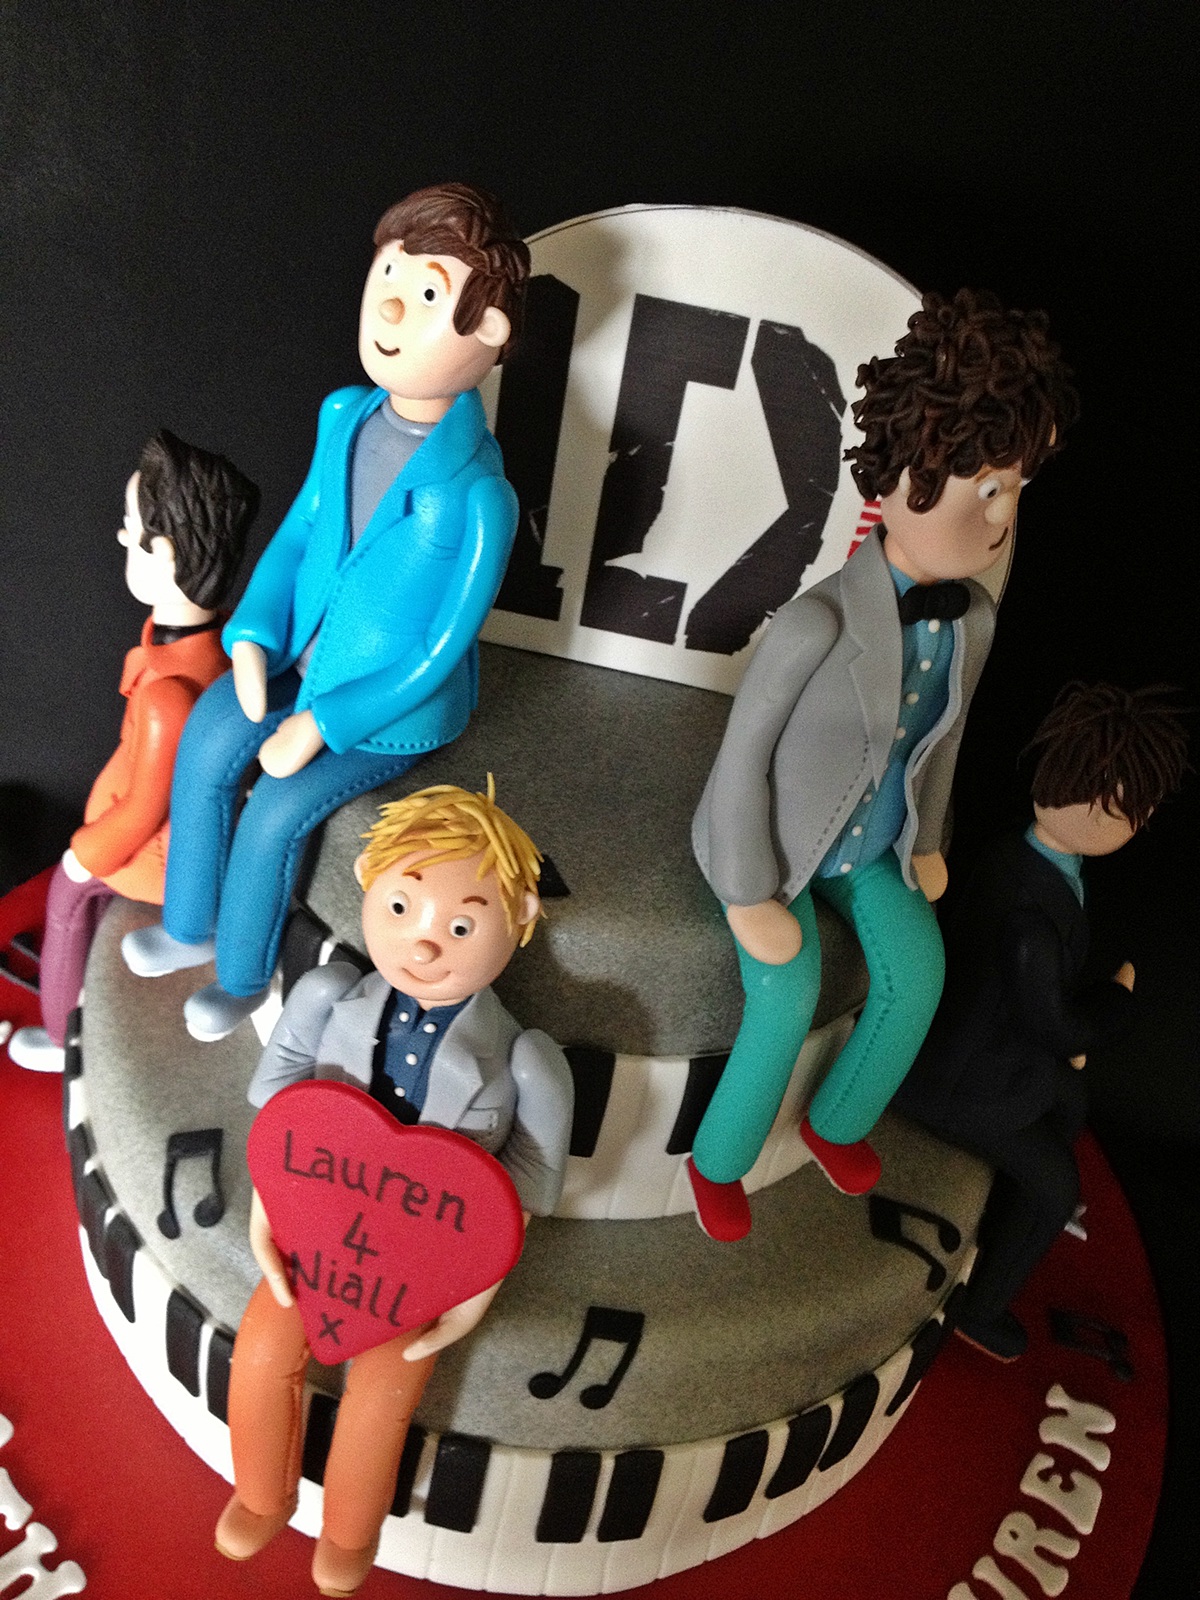 1d one direction www.cakecoop.com cakes